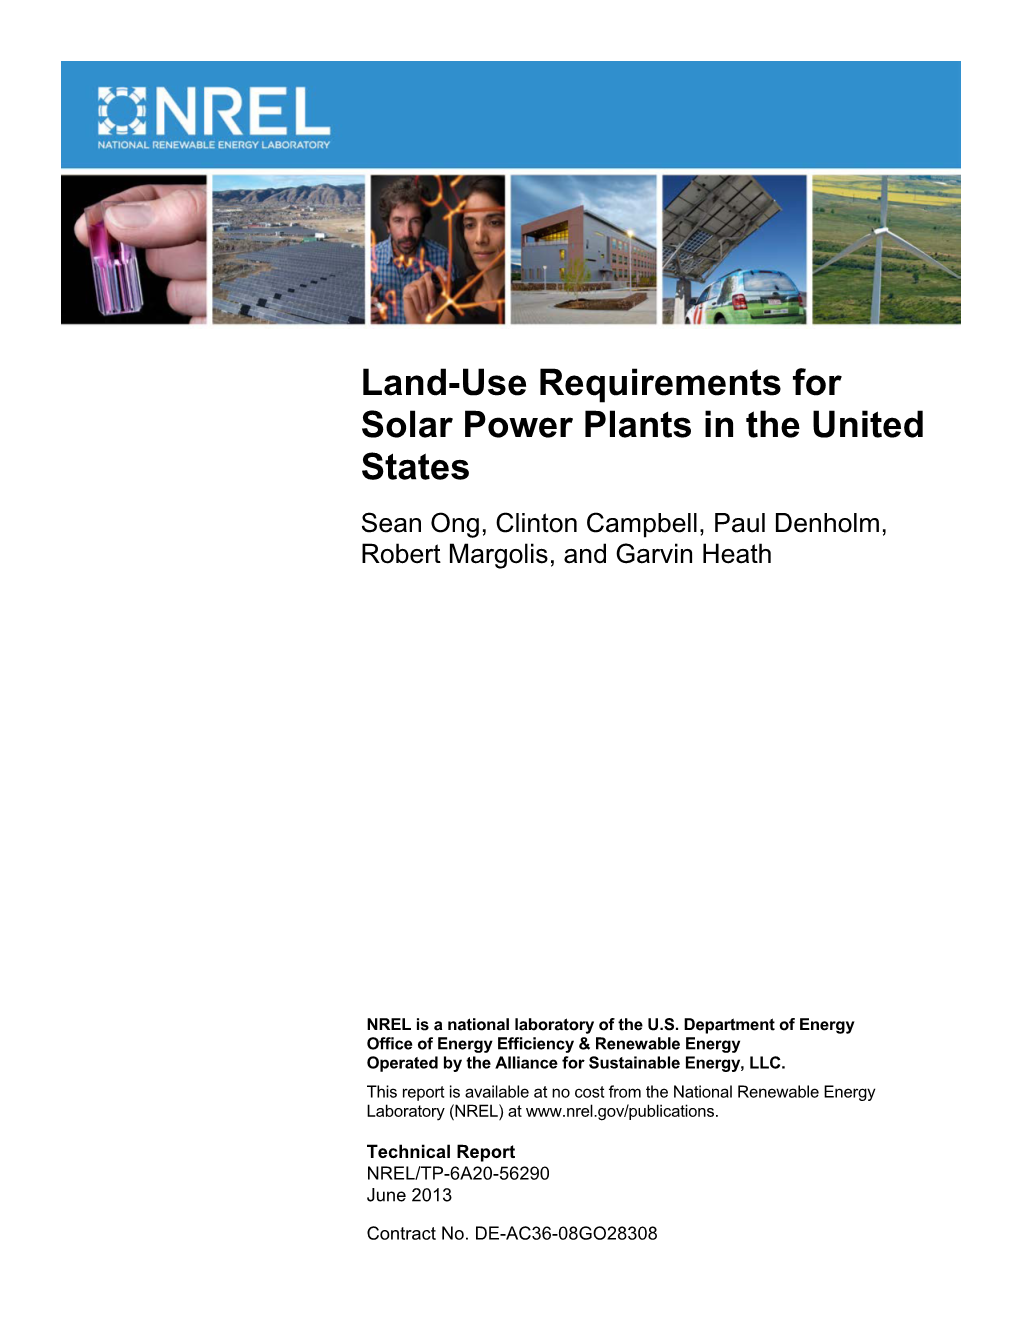 Land-Use Requirements for Solar Power Plants in the United States Sean Ong, Clinton Campbell, Paul Denholm, Robert Margolis, and Garvin Heath